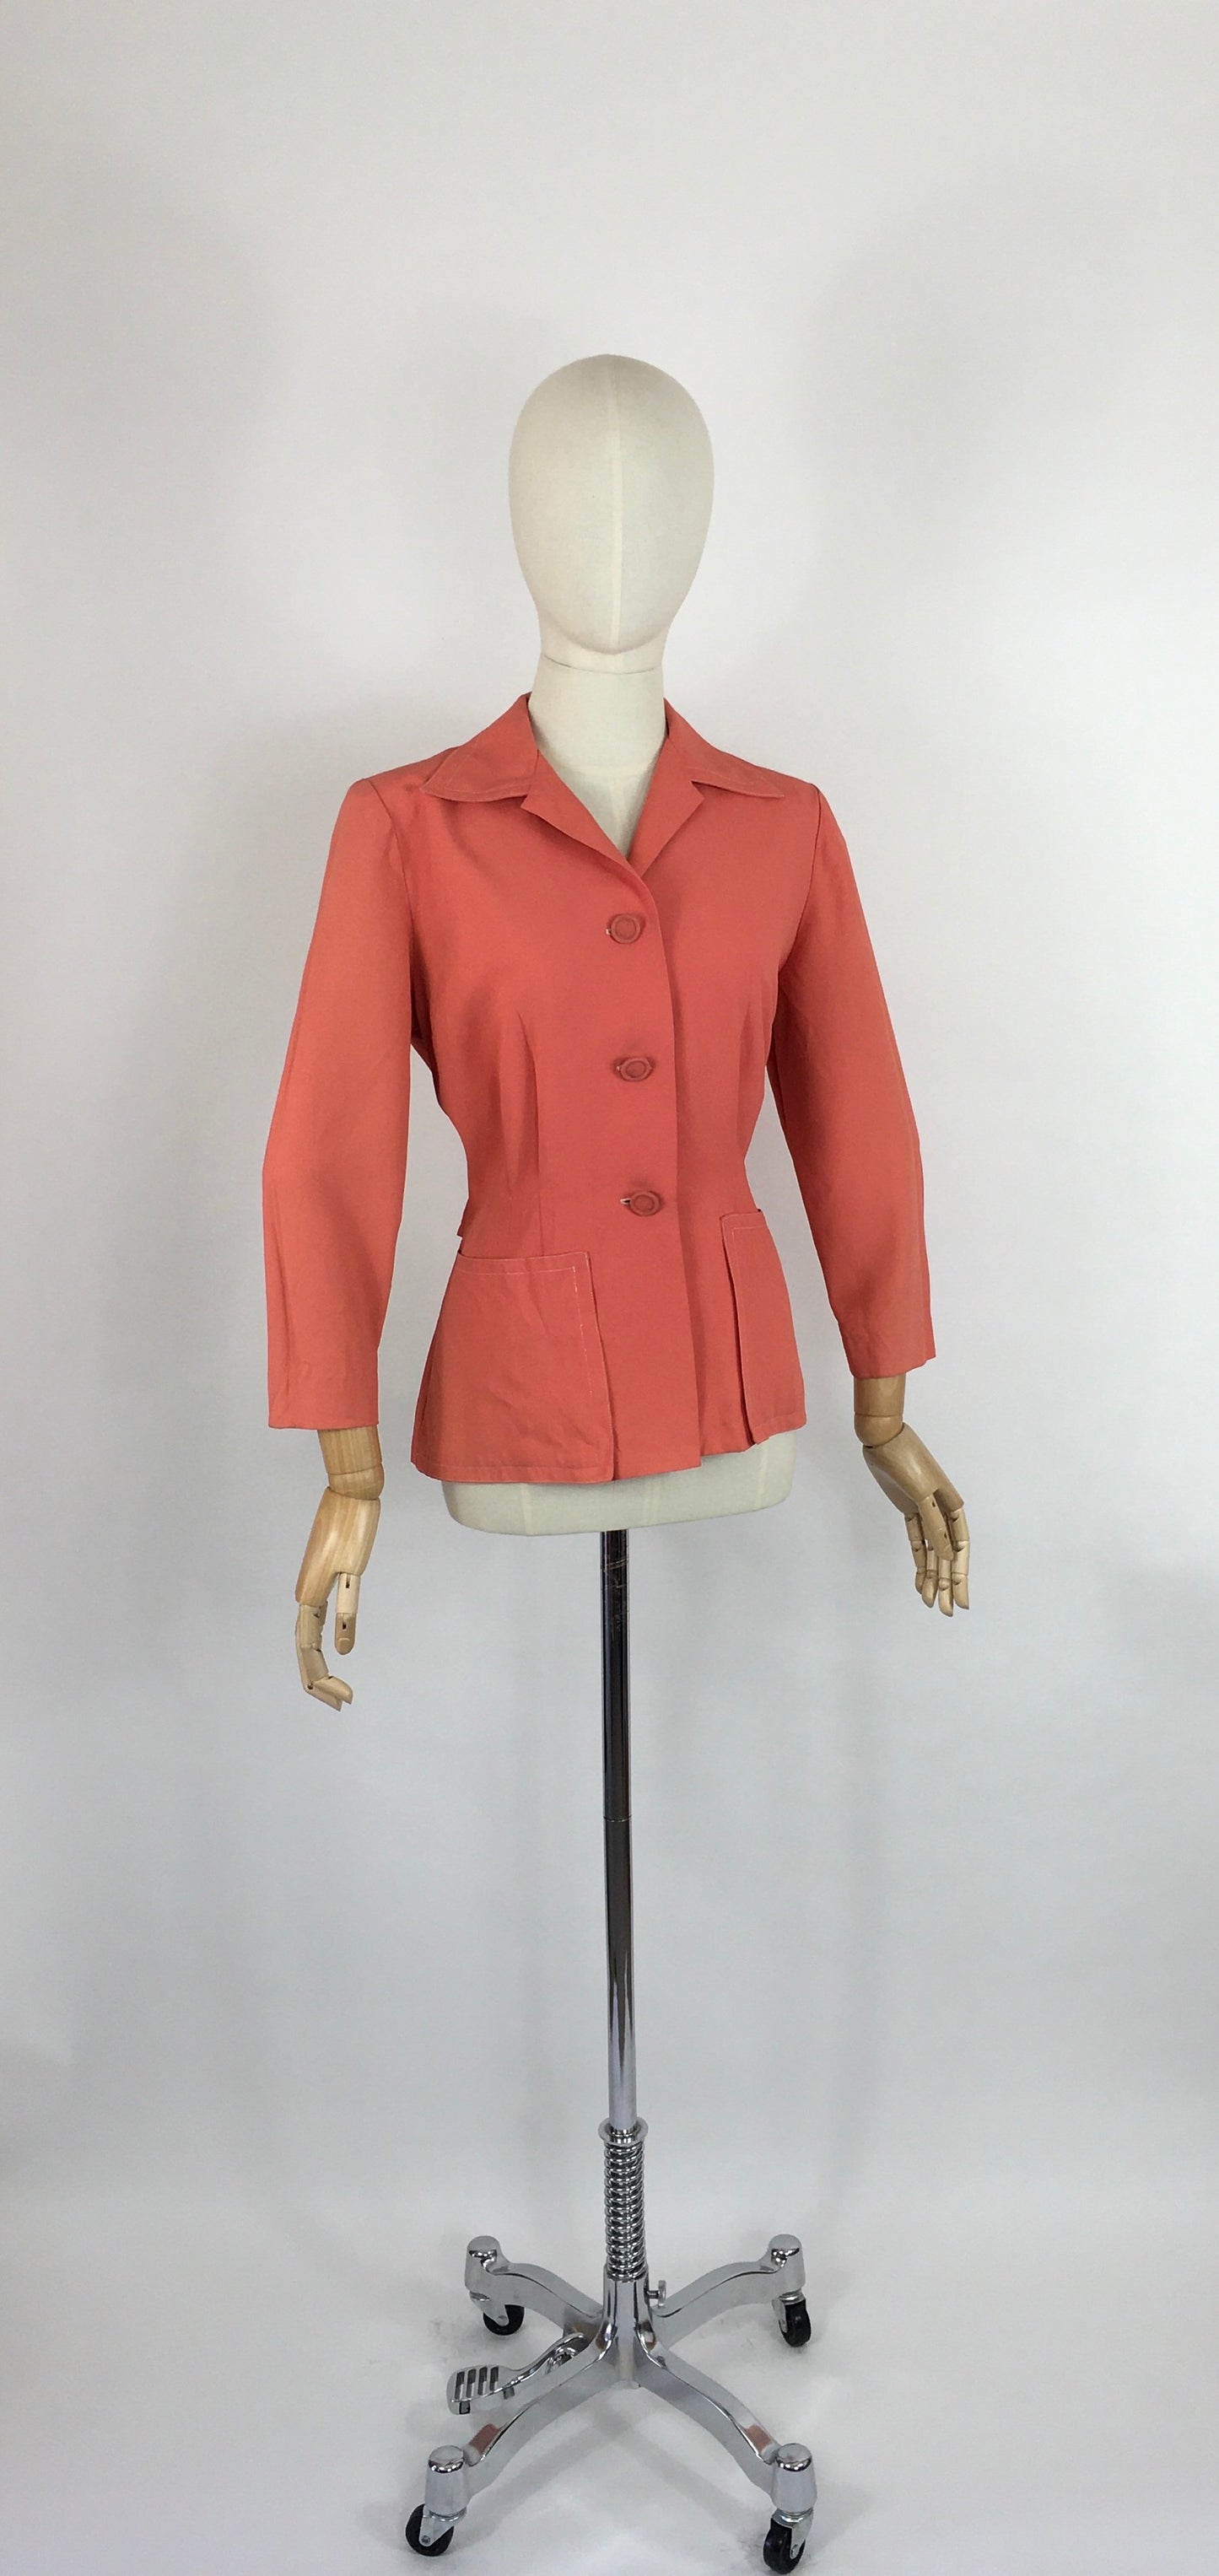 Original 1940s  Summer Jacket With Back Belt Detailing  - In A Fabulous Coral Colour ‘ A Bobby Ann Original’